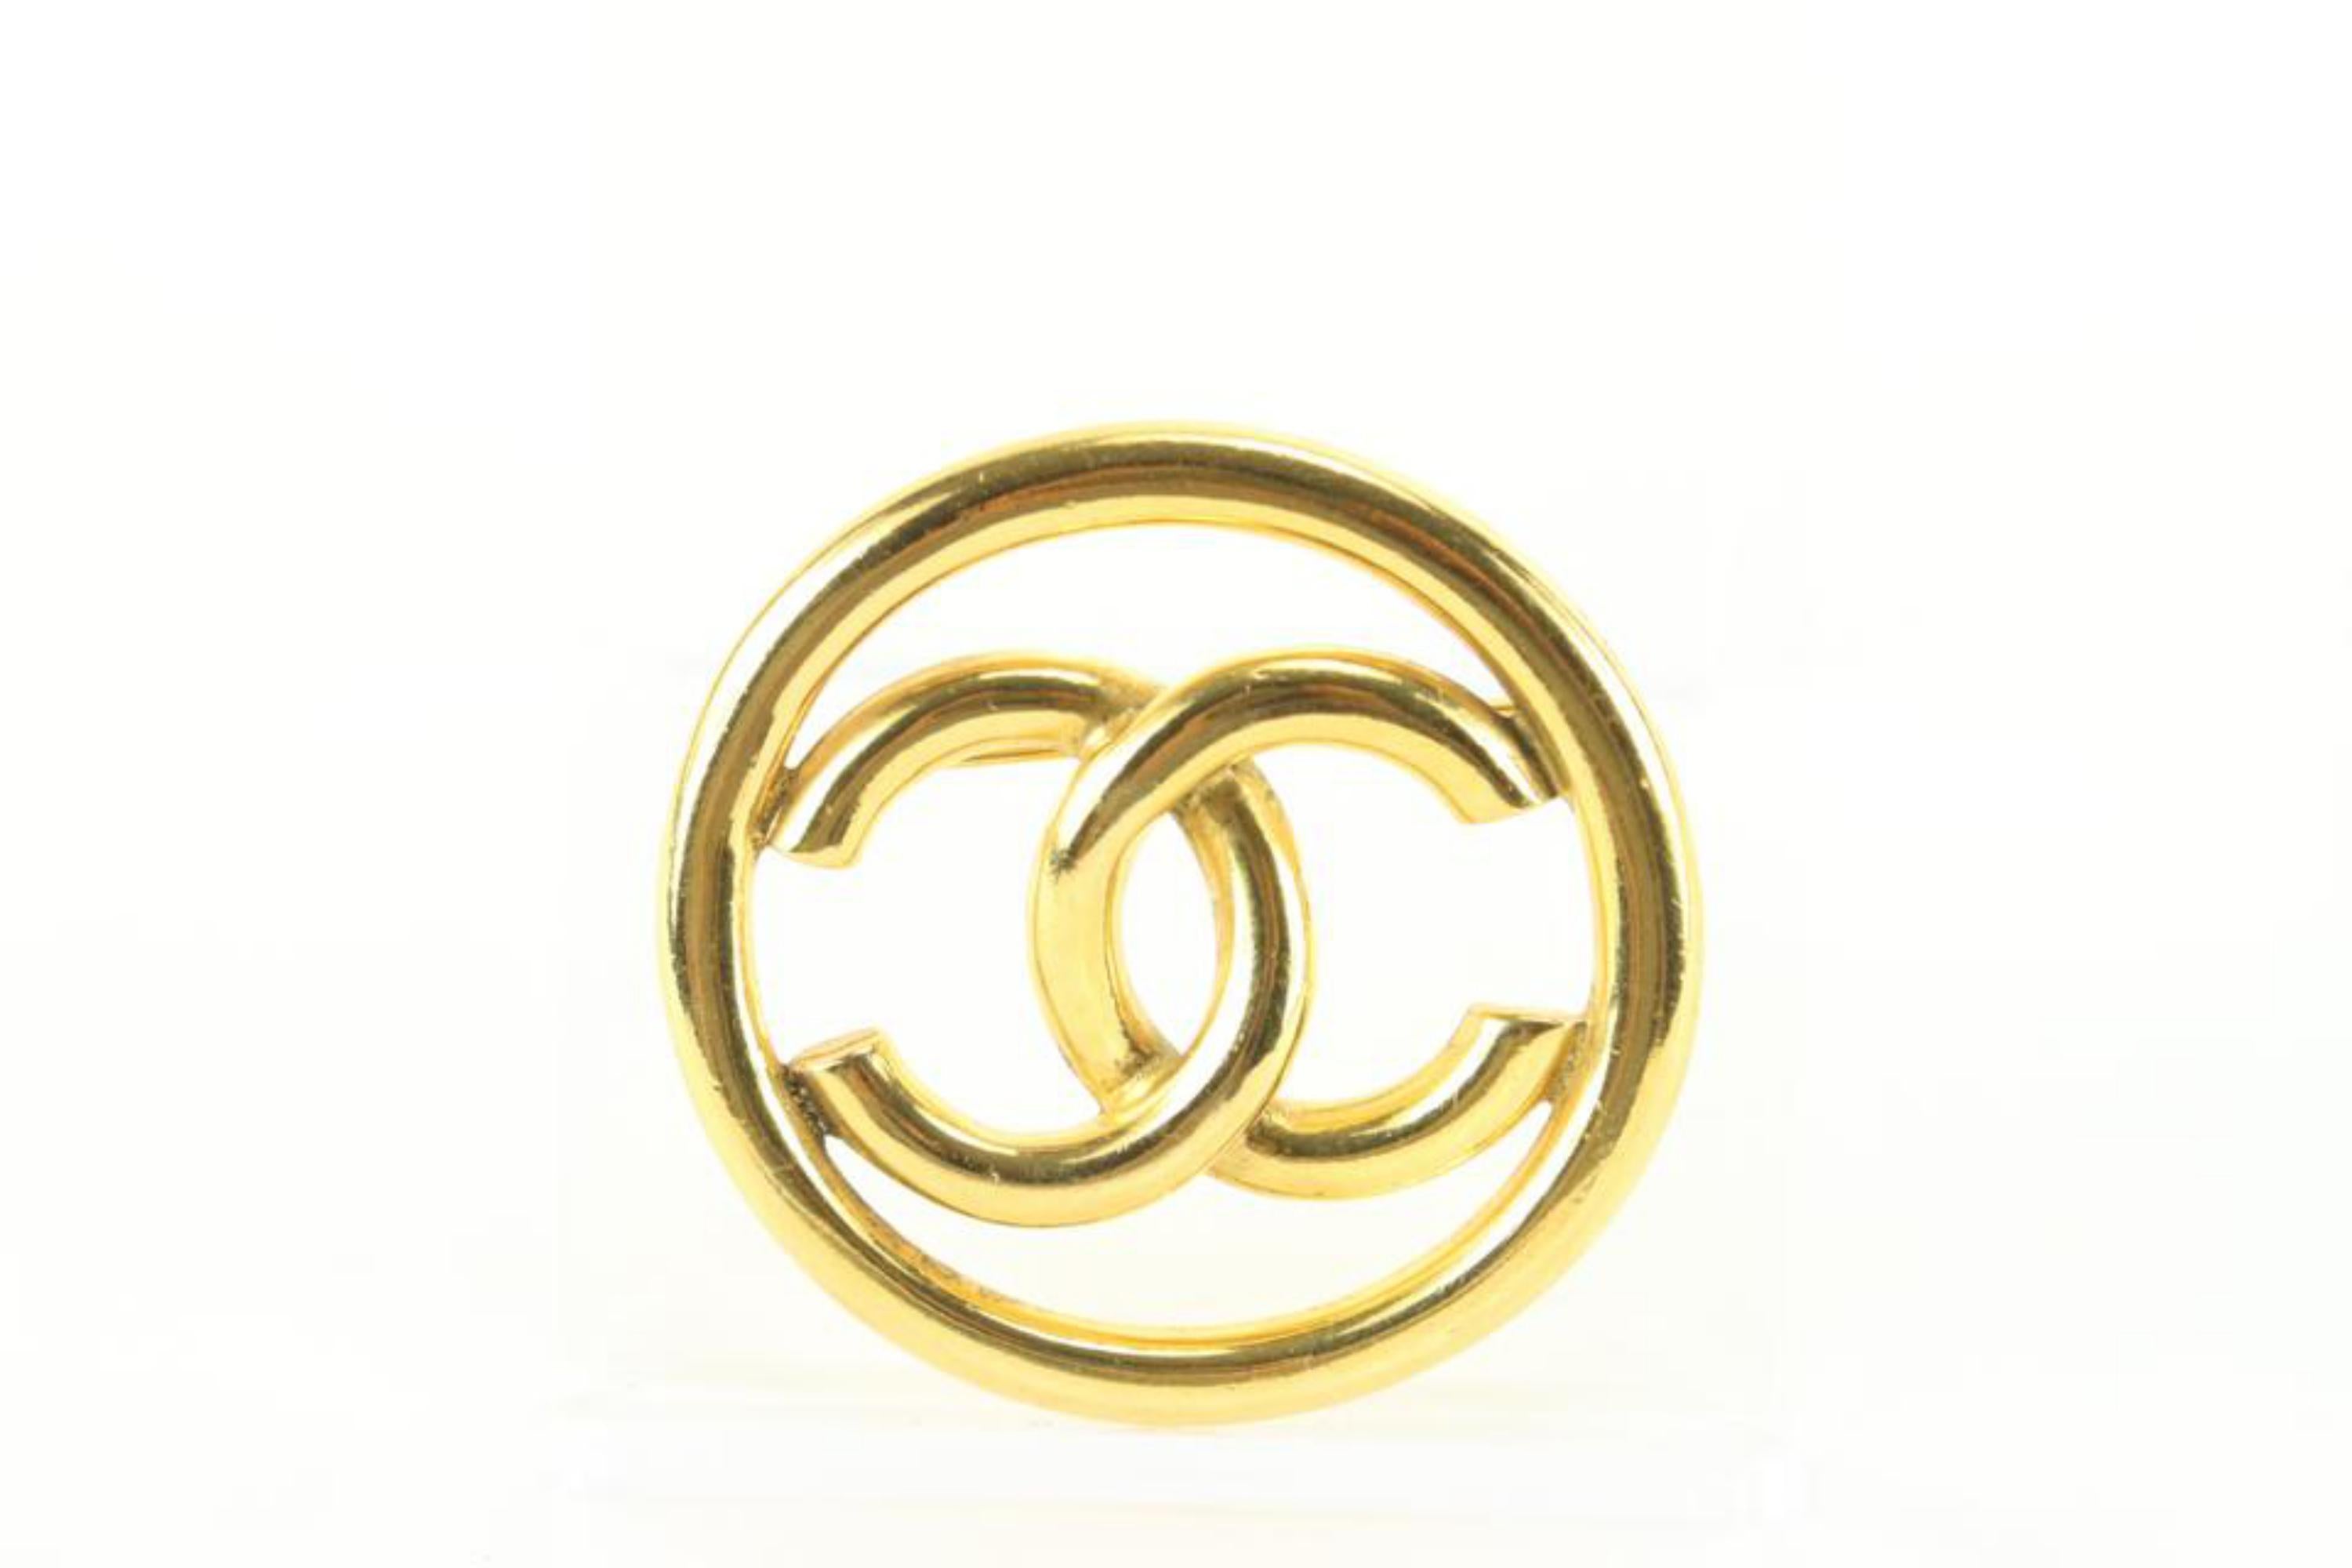 Chanel 93P 24k Gold Plate CC Logo Circle Brooch Pin 31ck824s – Bagriculture